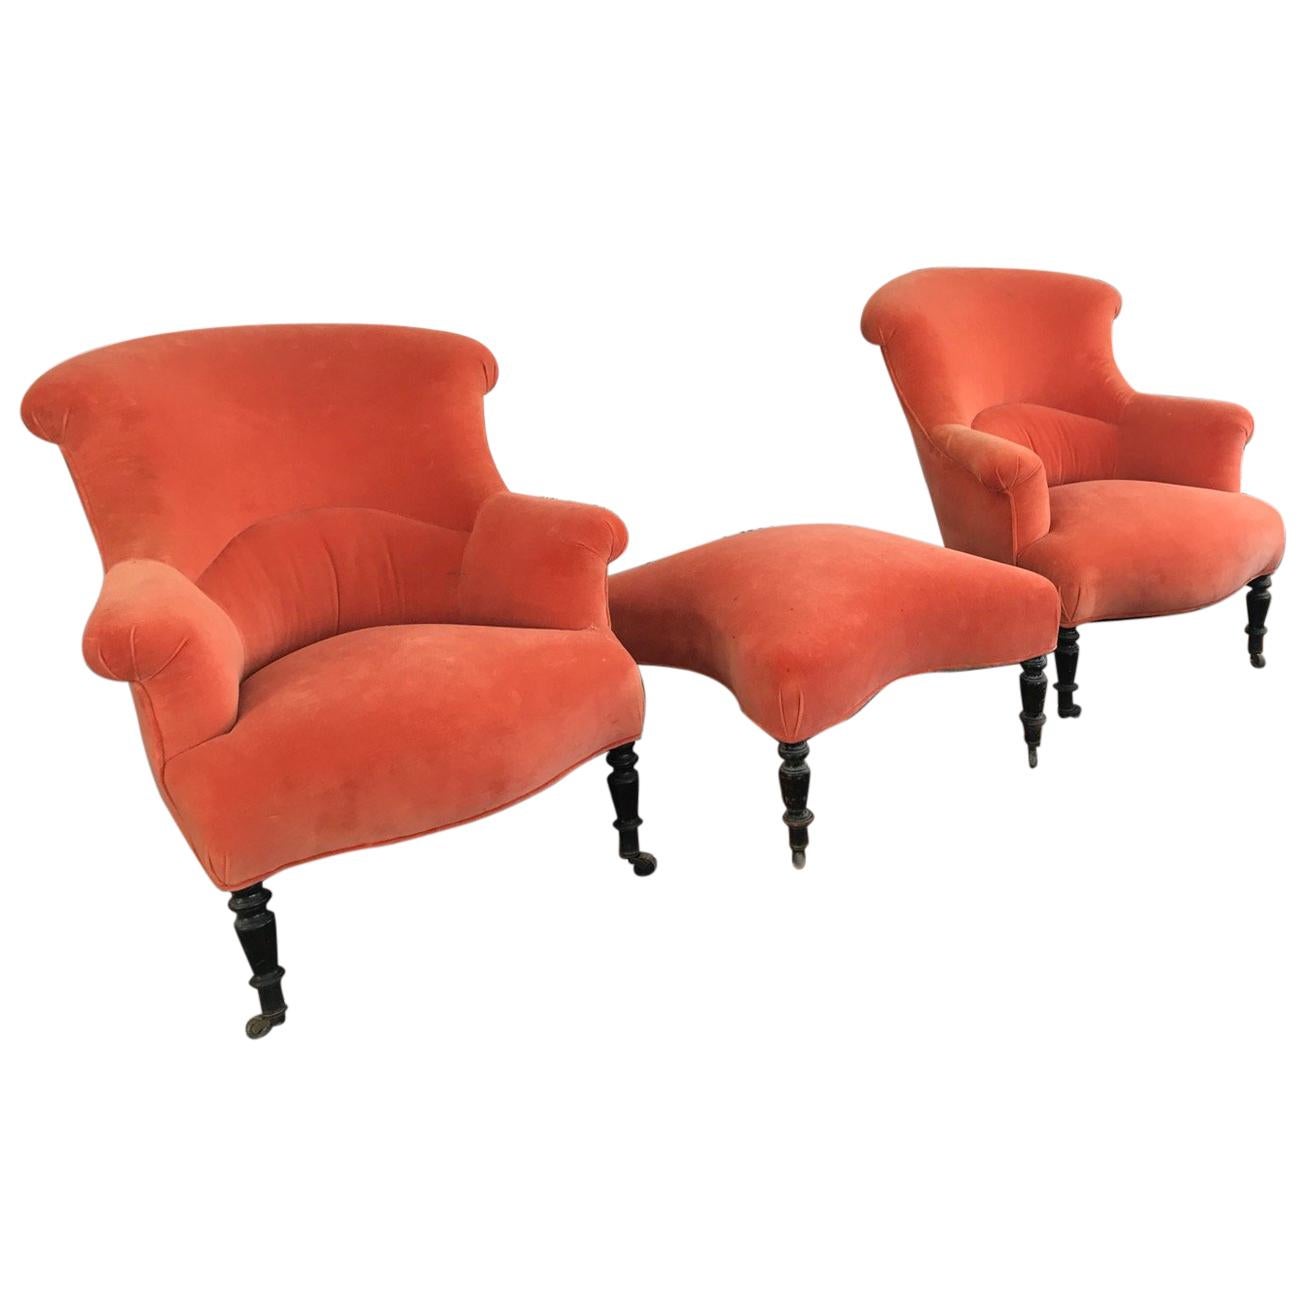 Pair of Upholstered Neoclassical Chairs with Ottoman For Sale